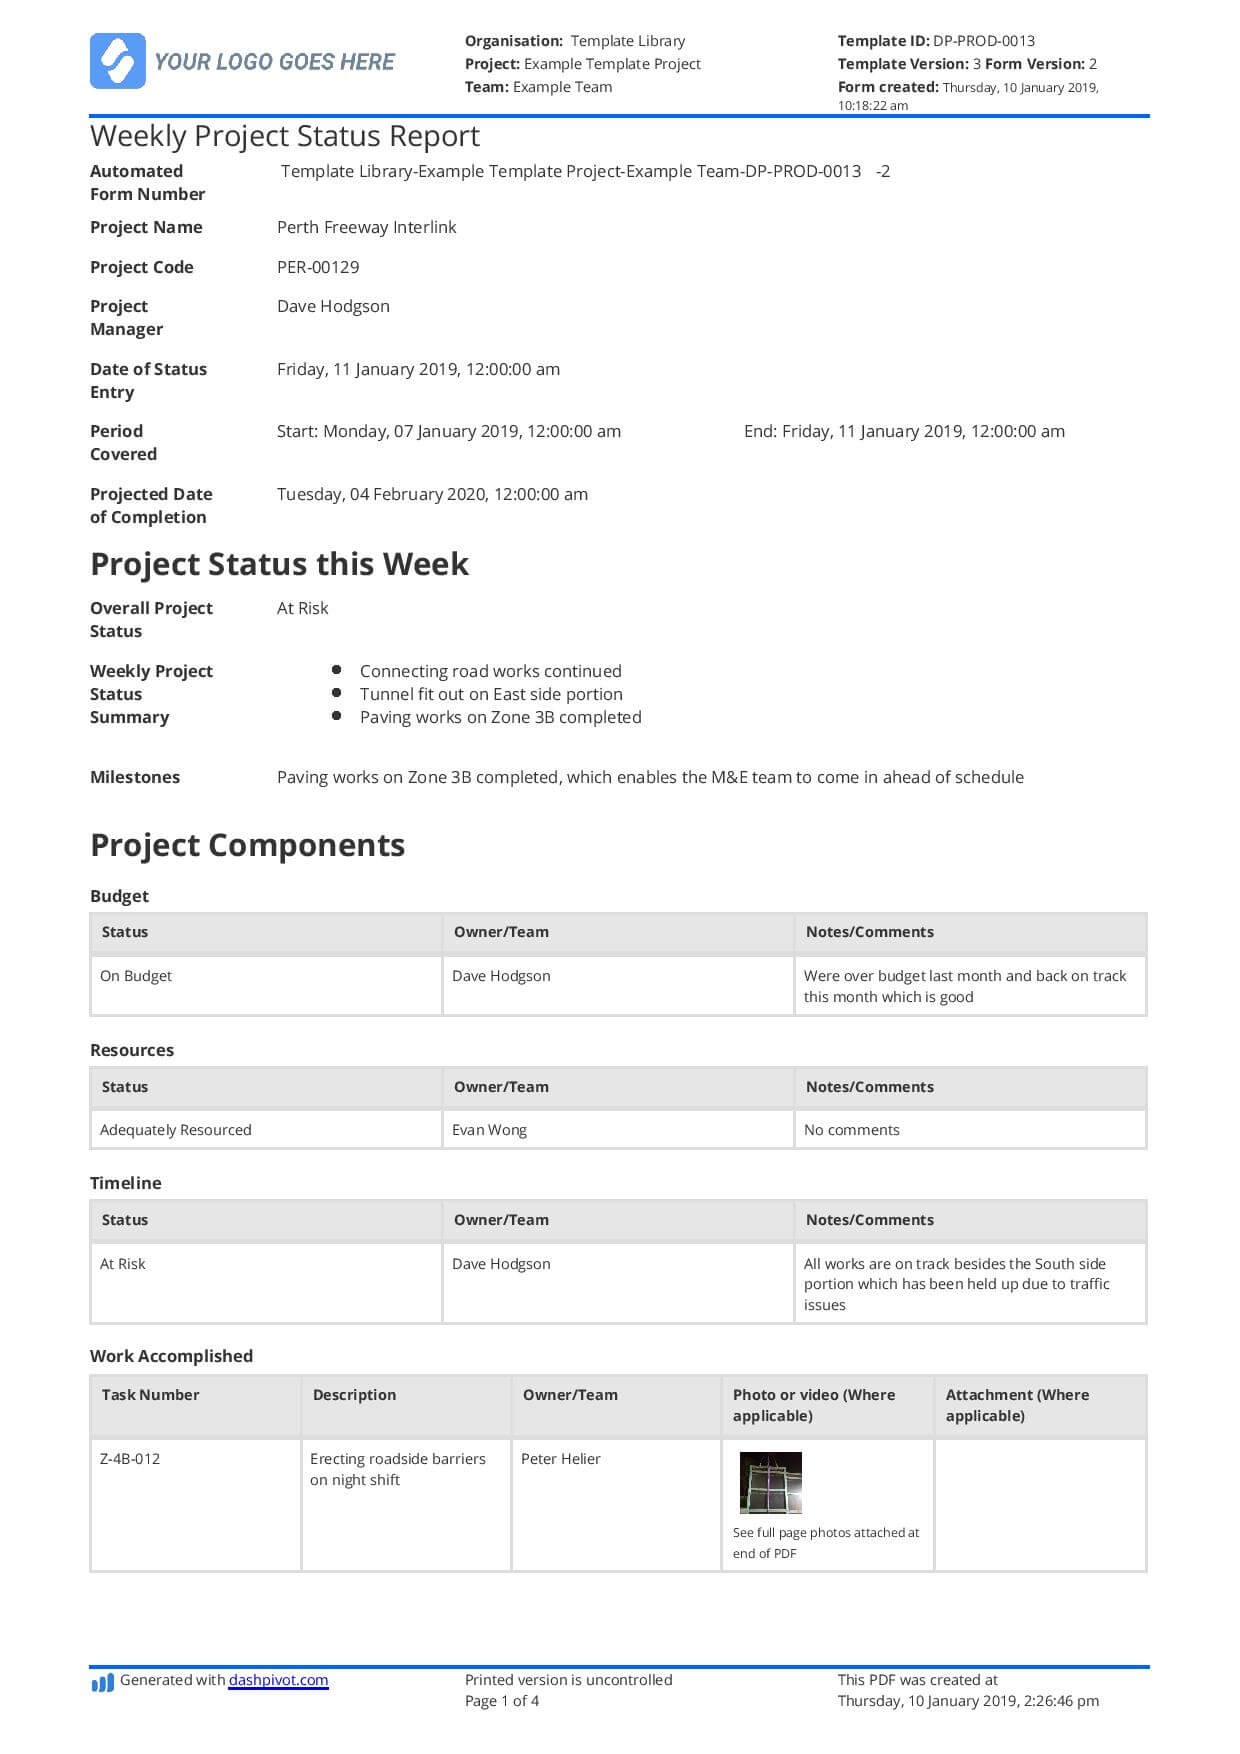 Example Of A Project Status Report To Copy, Use, Download Or Throughout One Page Project Status Report Template